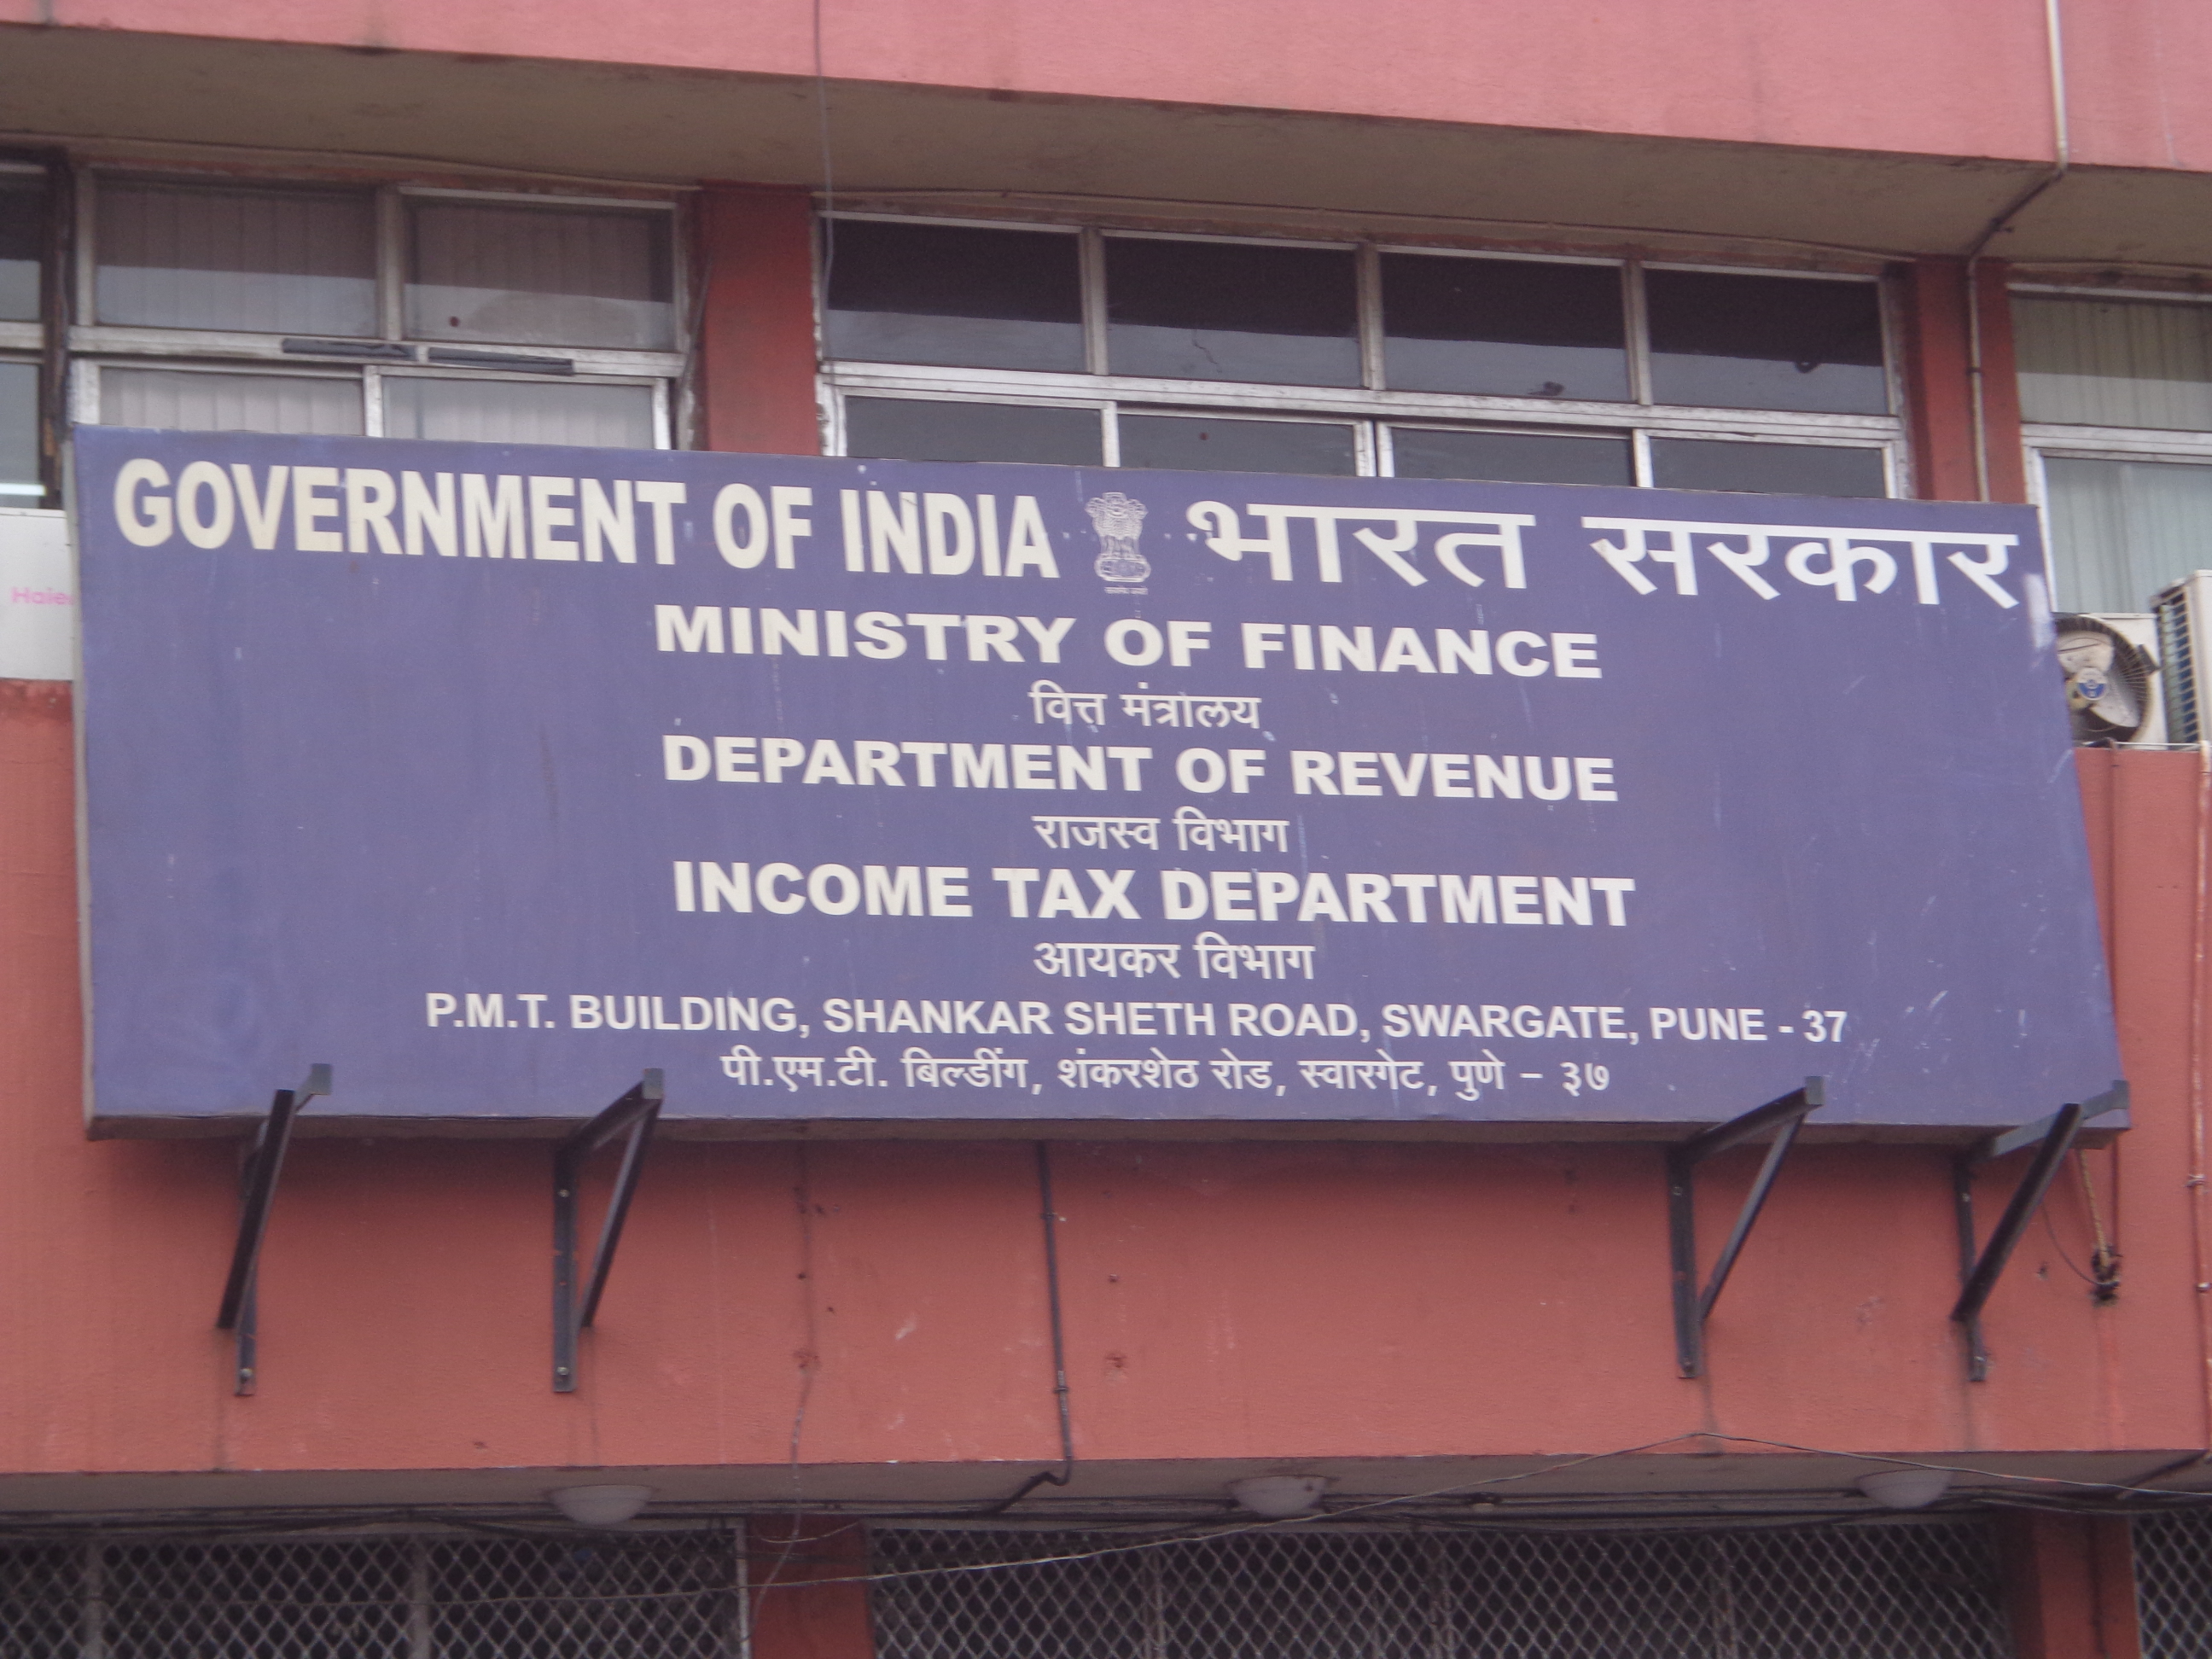 I-T dept files 4 fresh chargesheets against Gautam Khaitan for holding undisclosed foreign assets